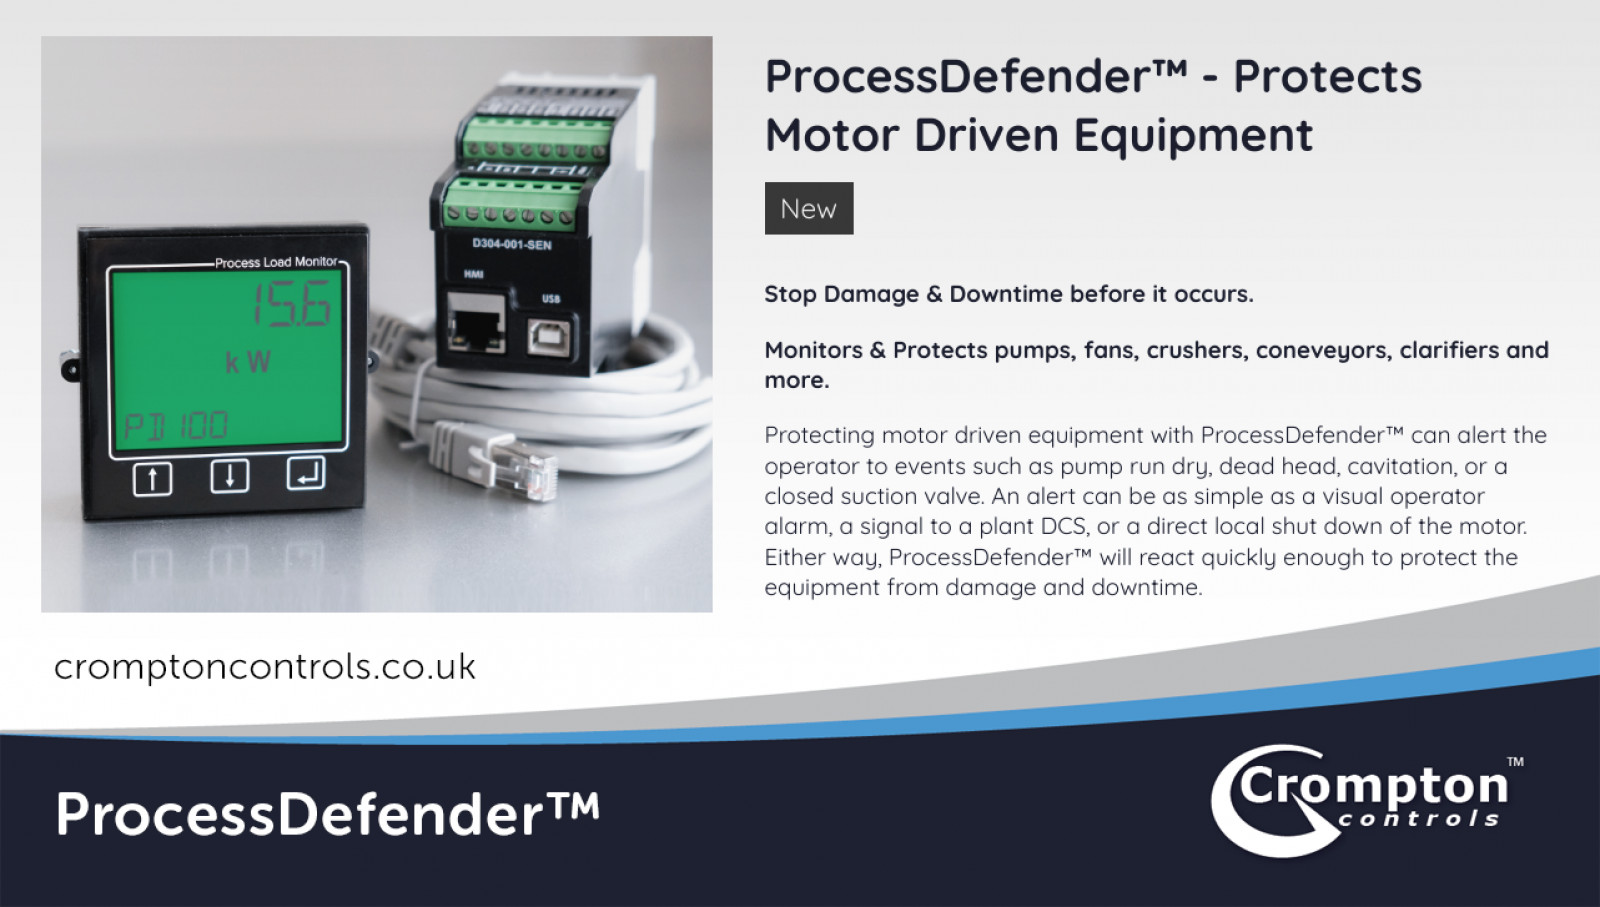 NEW PRODUCT: ProcessDefender™ Protects Motor Drive...